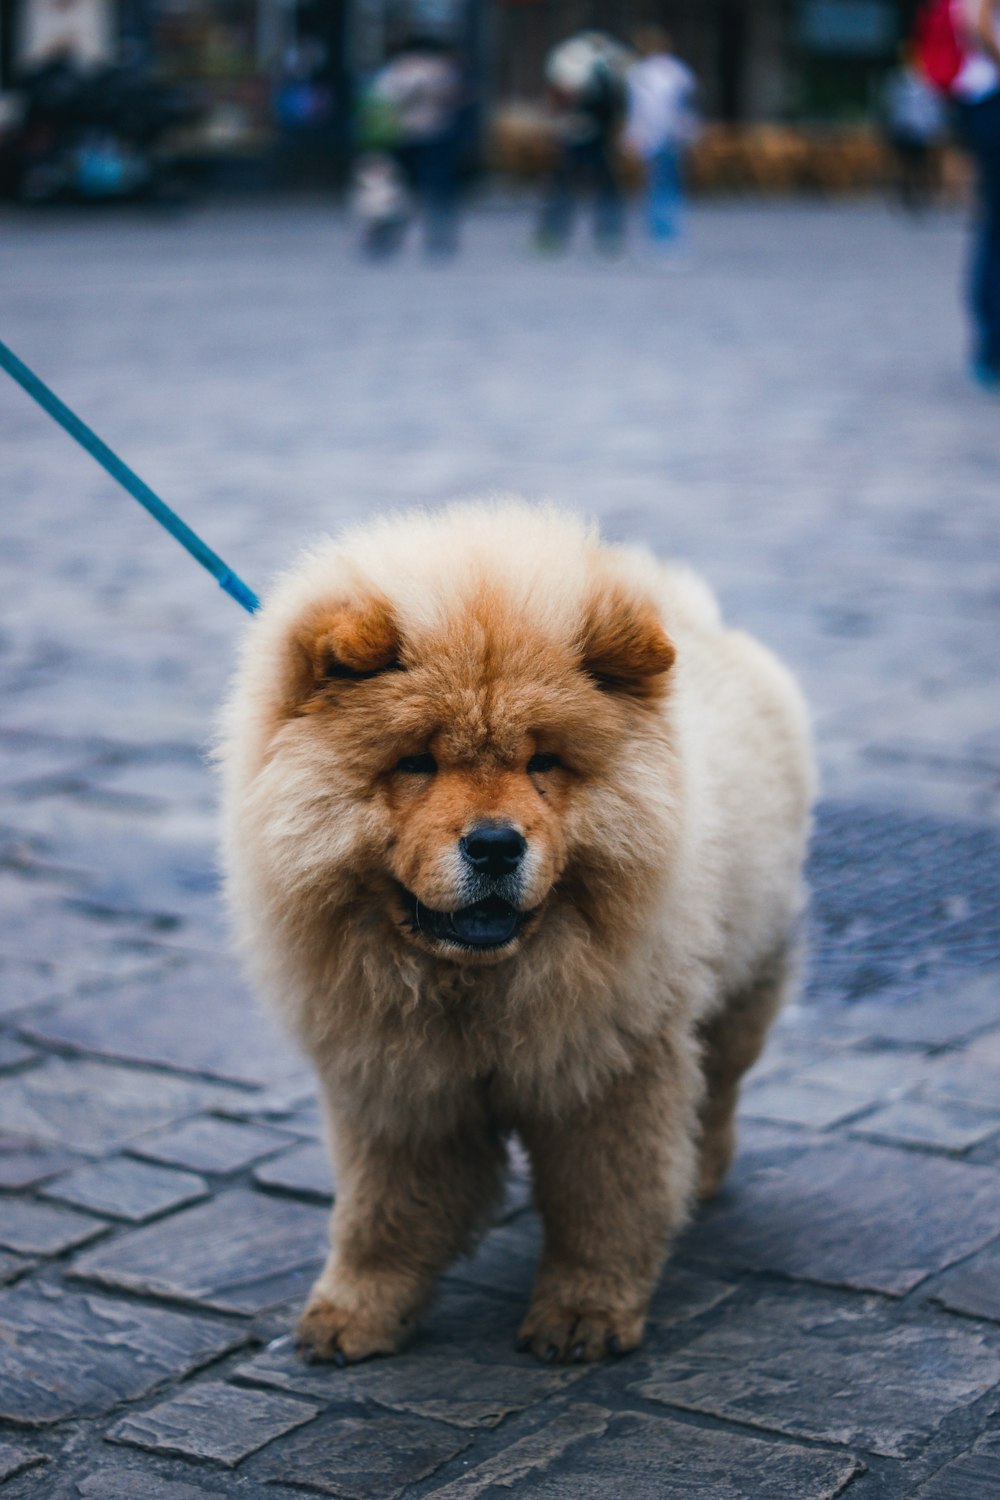 closeup photo of chowchow standing on pavement